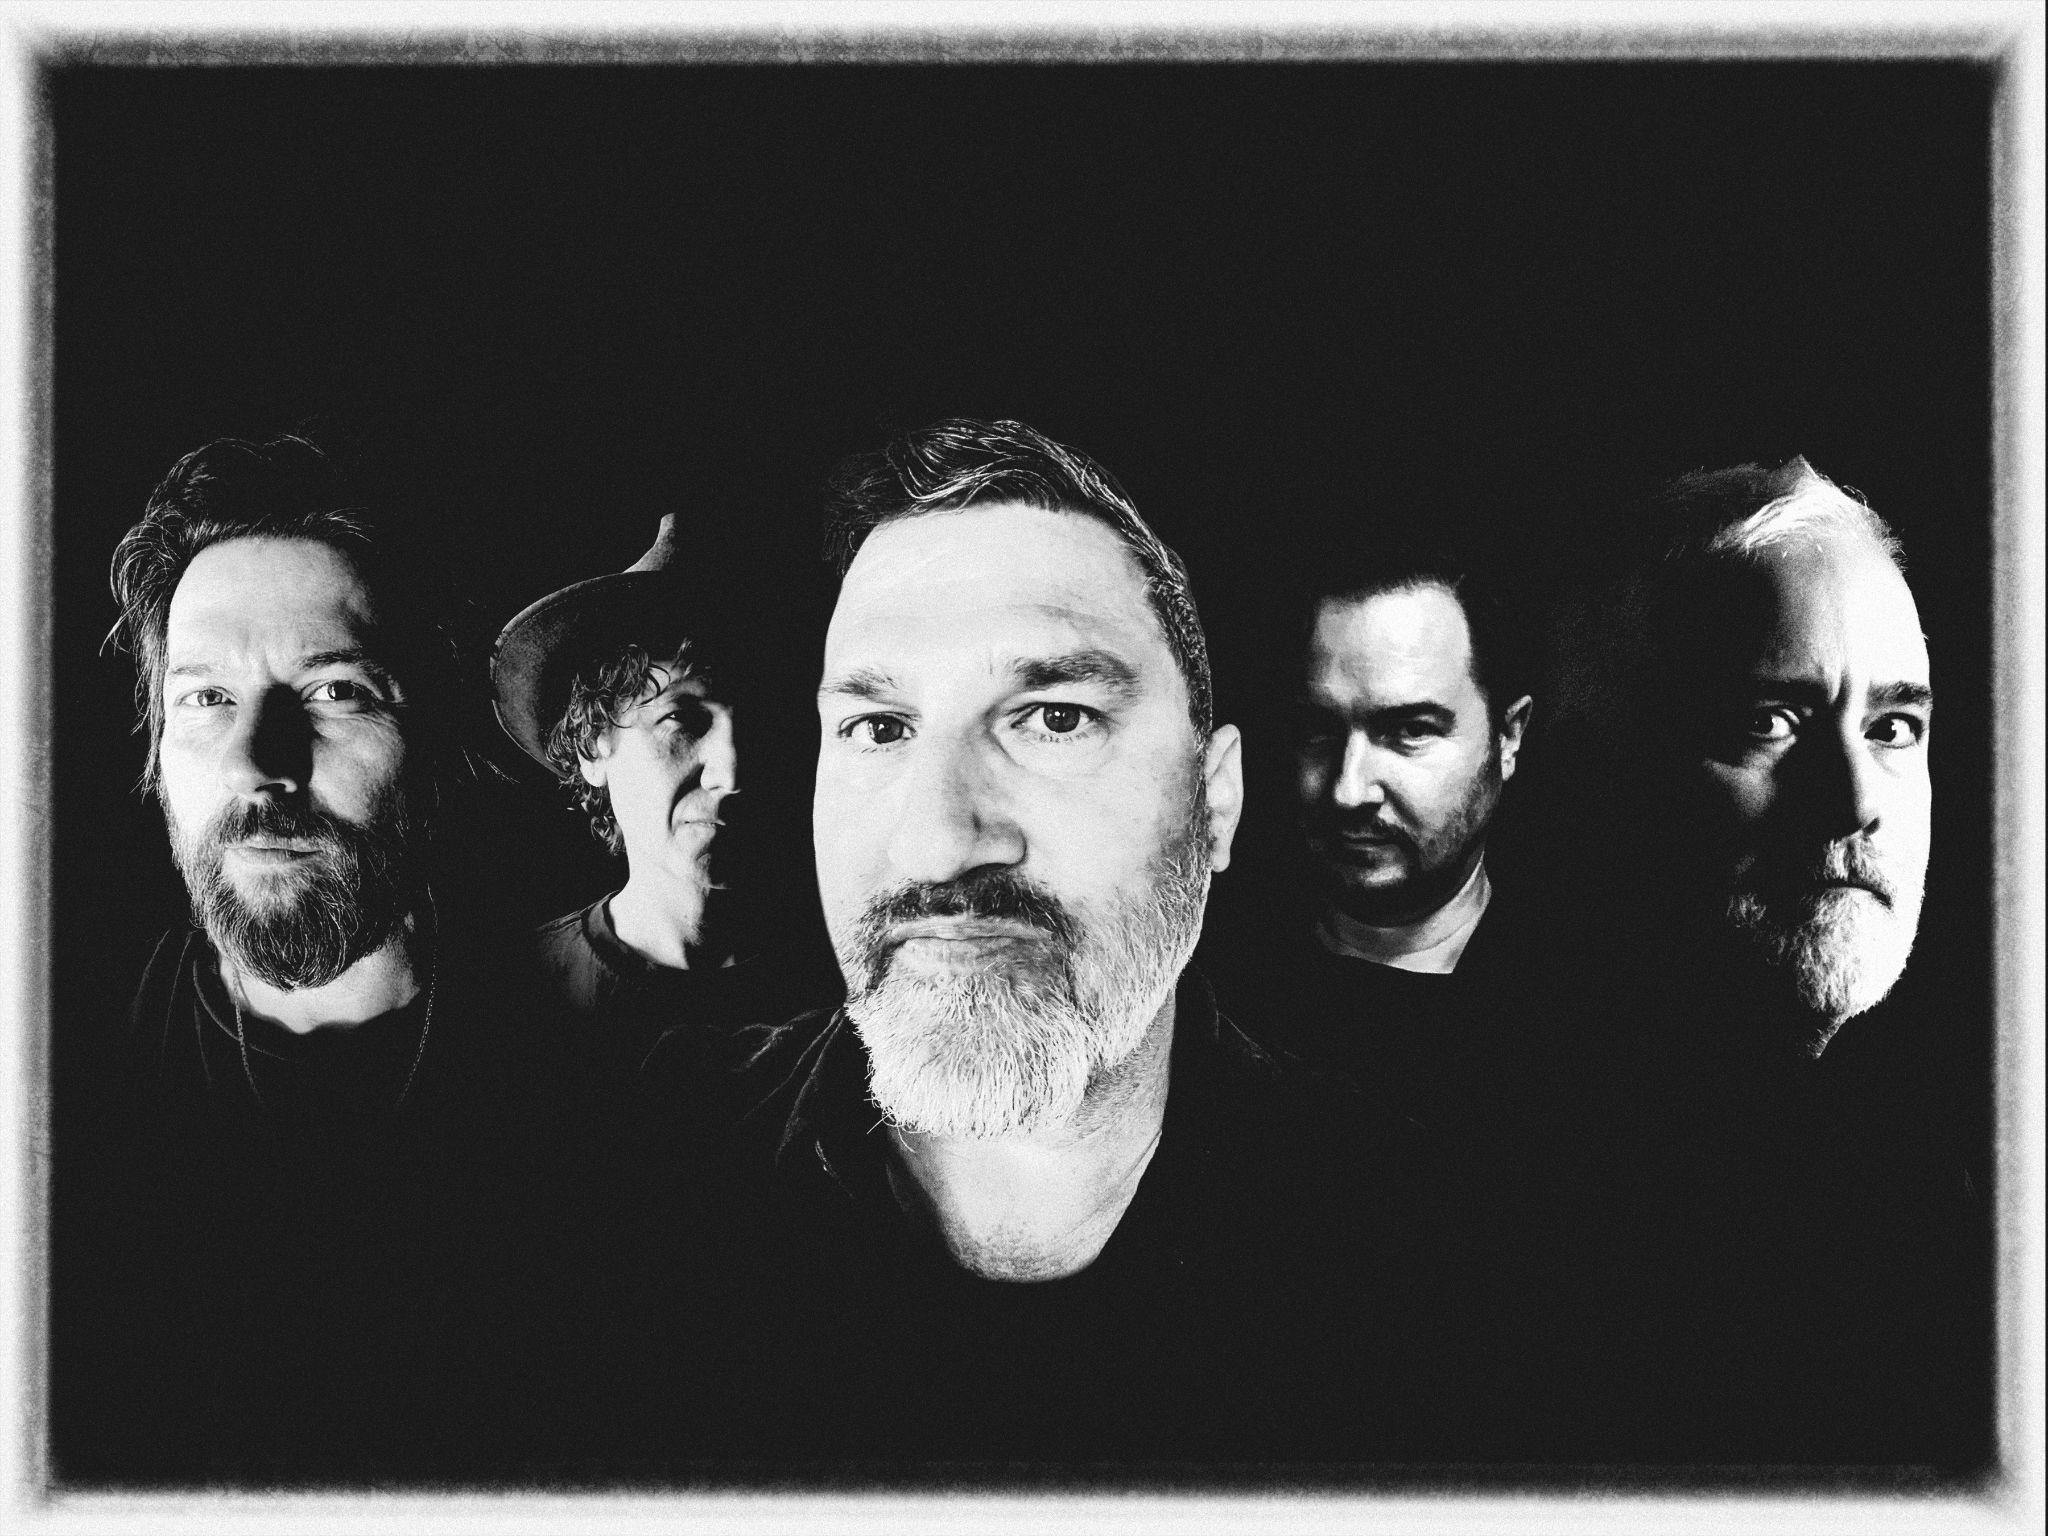 THE AFGHAN WHIGS – il nuovo singolo “I’ll Make You See God”